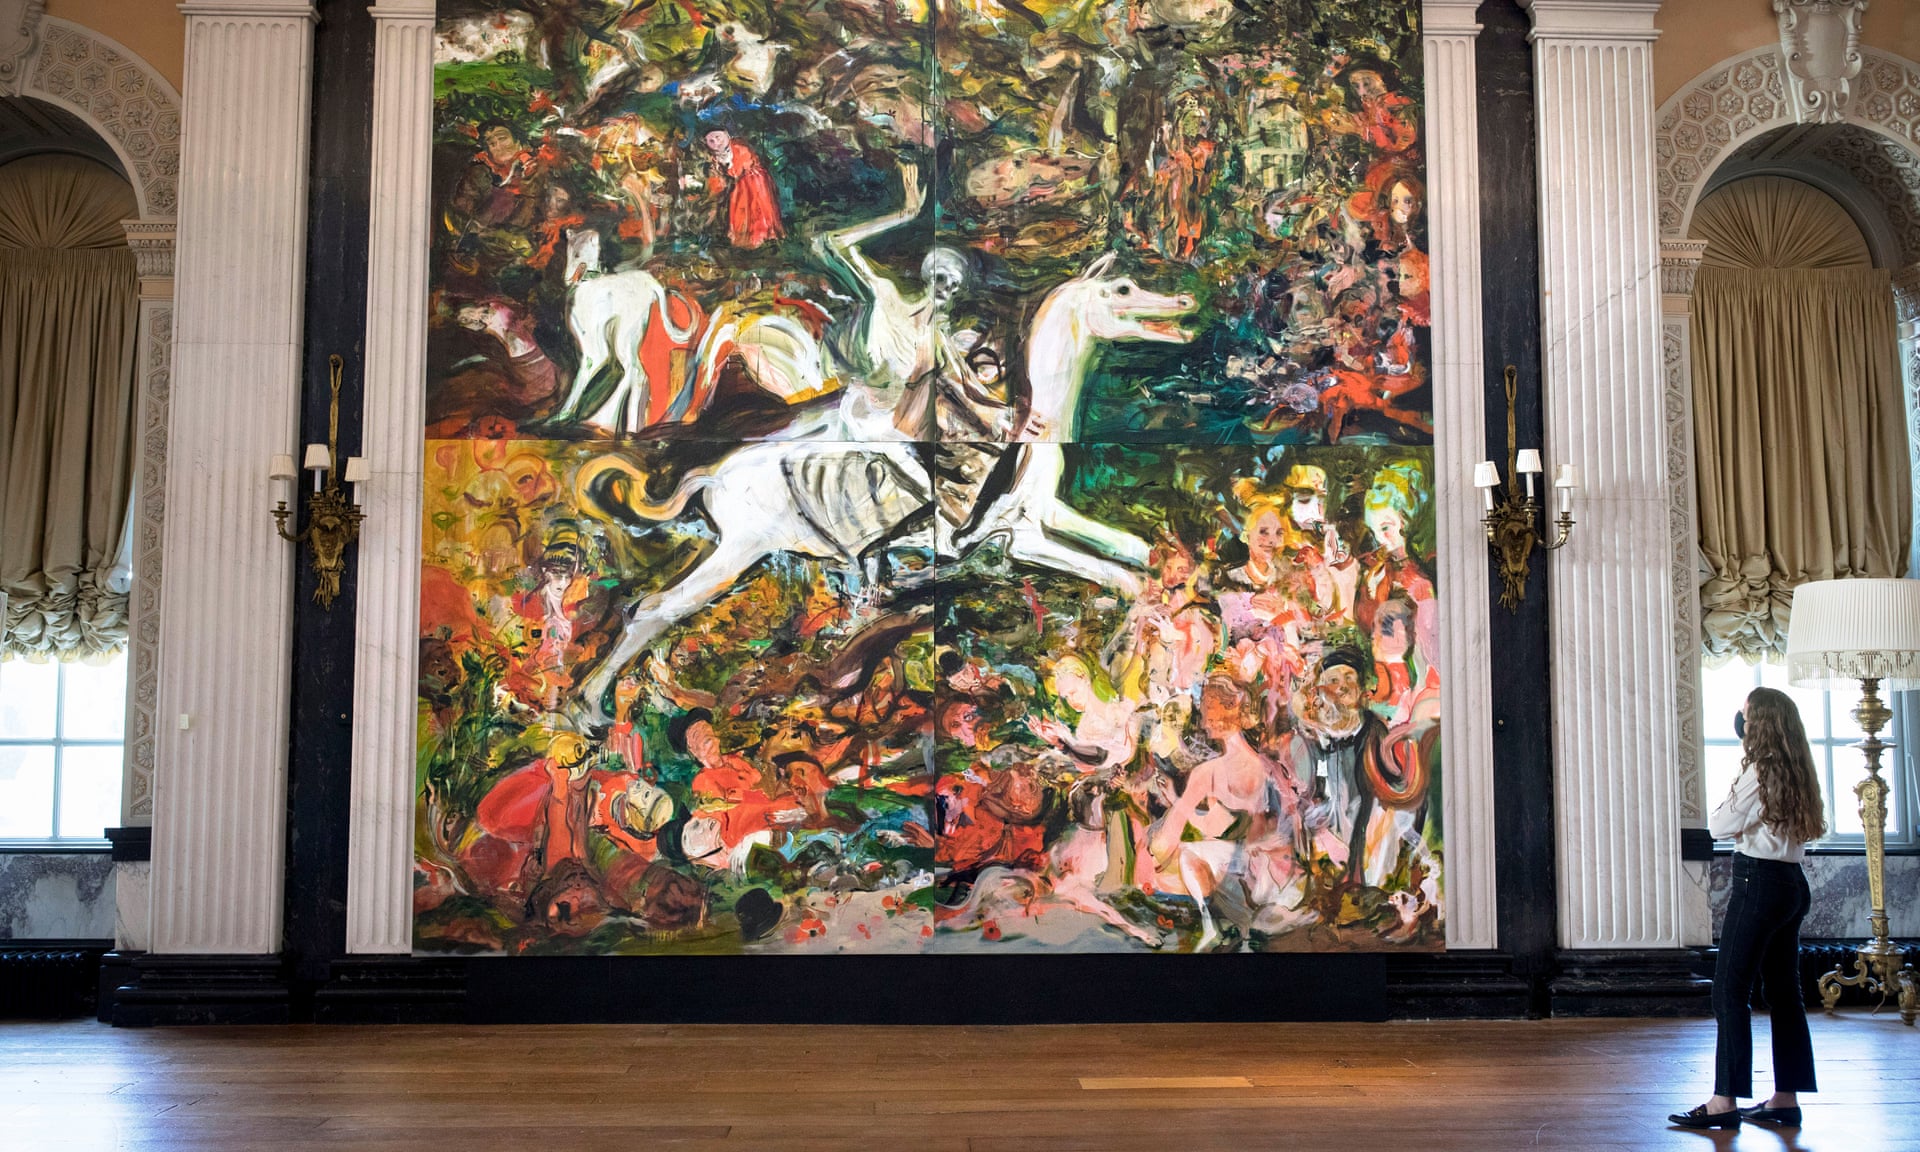 In a large palace room, a woman gazes up at a floor-to-ceiling mural. In it, a skeleton with its right hand raised, rides on a skinny, deformed white horse in the middle of four panels. Abstract light-skinned human figures sit around the horse’s feet, some lounging and speaking amongst themselves. Streaks of gold, green, and teal surround the figures.